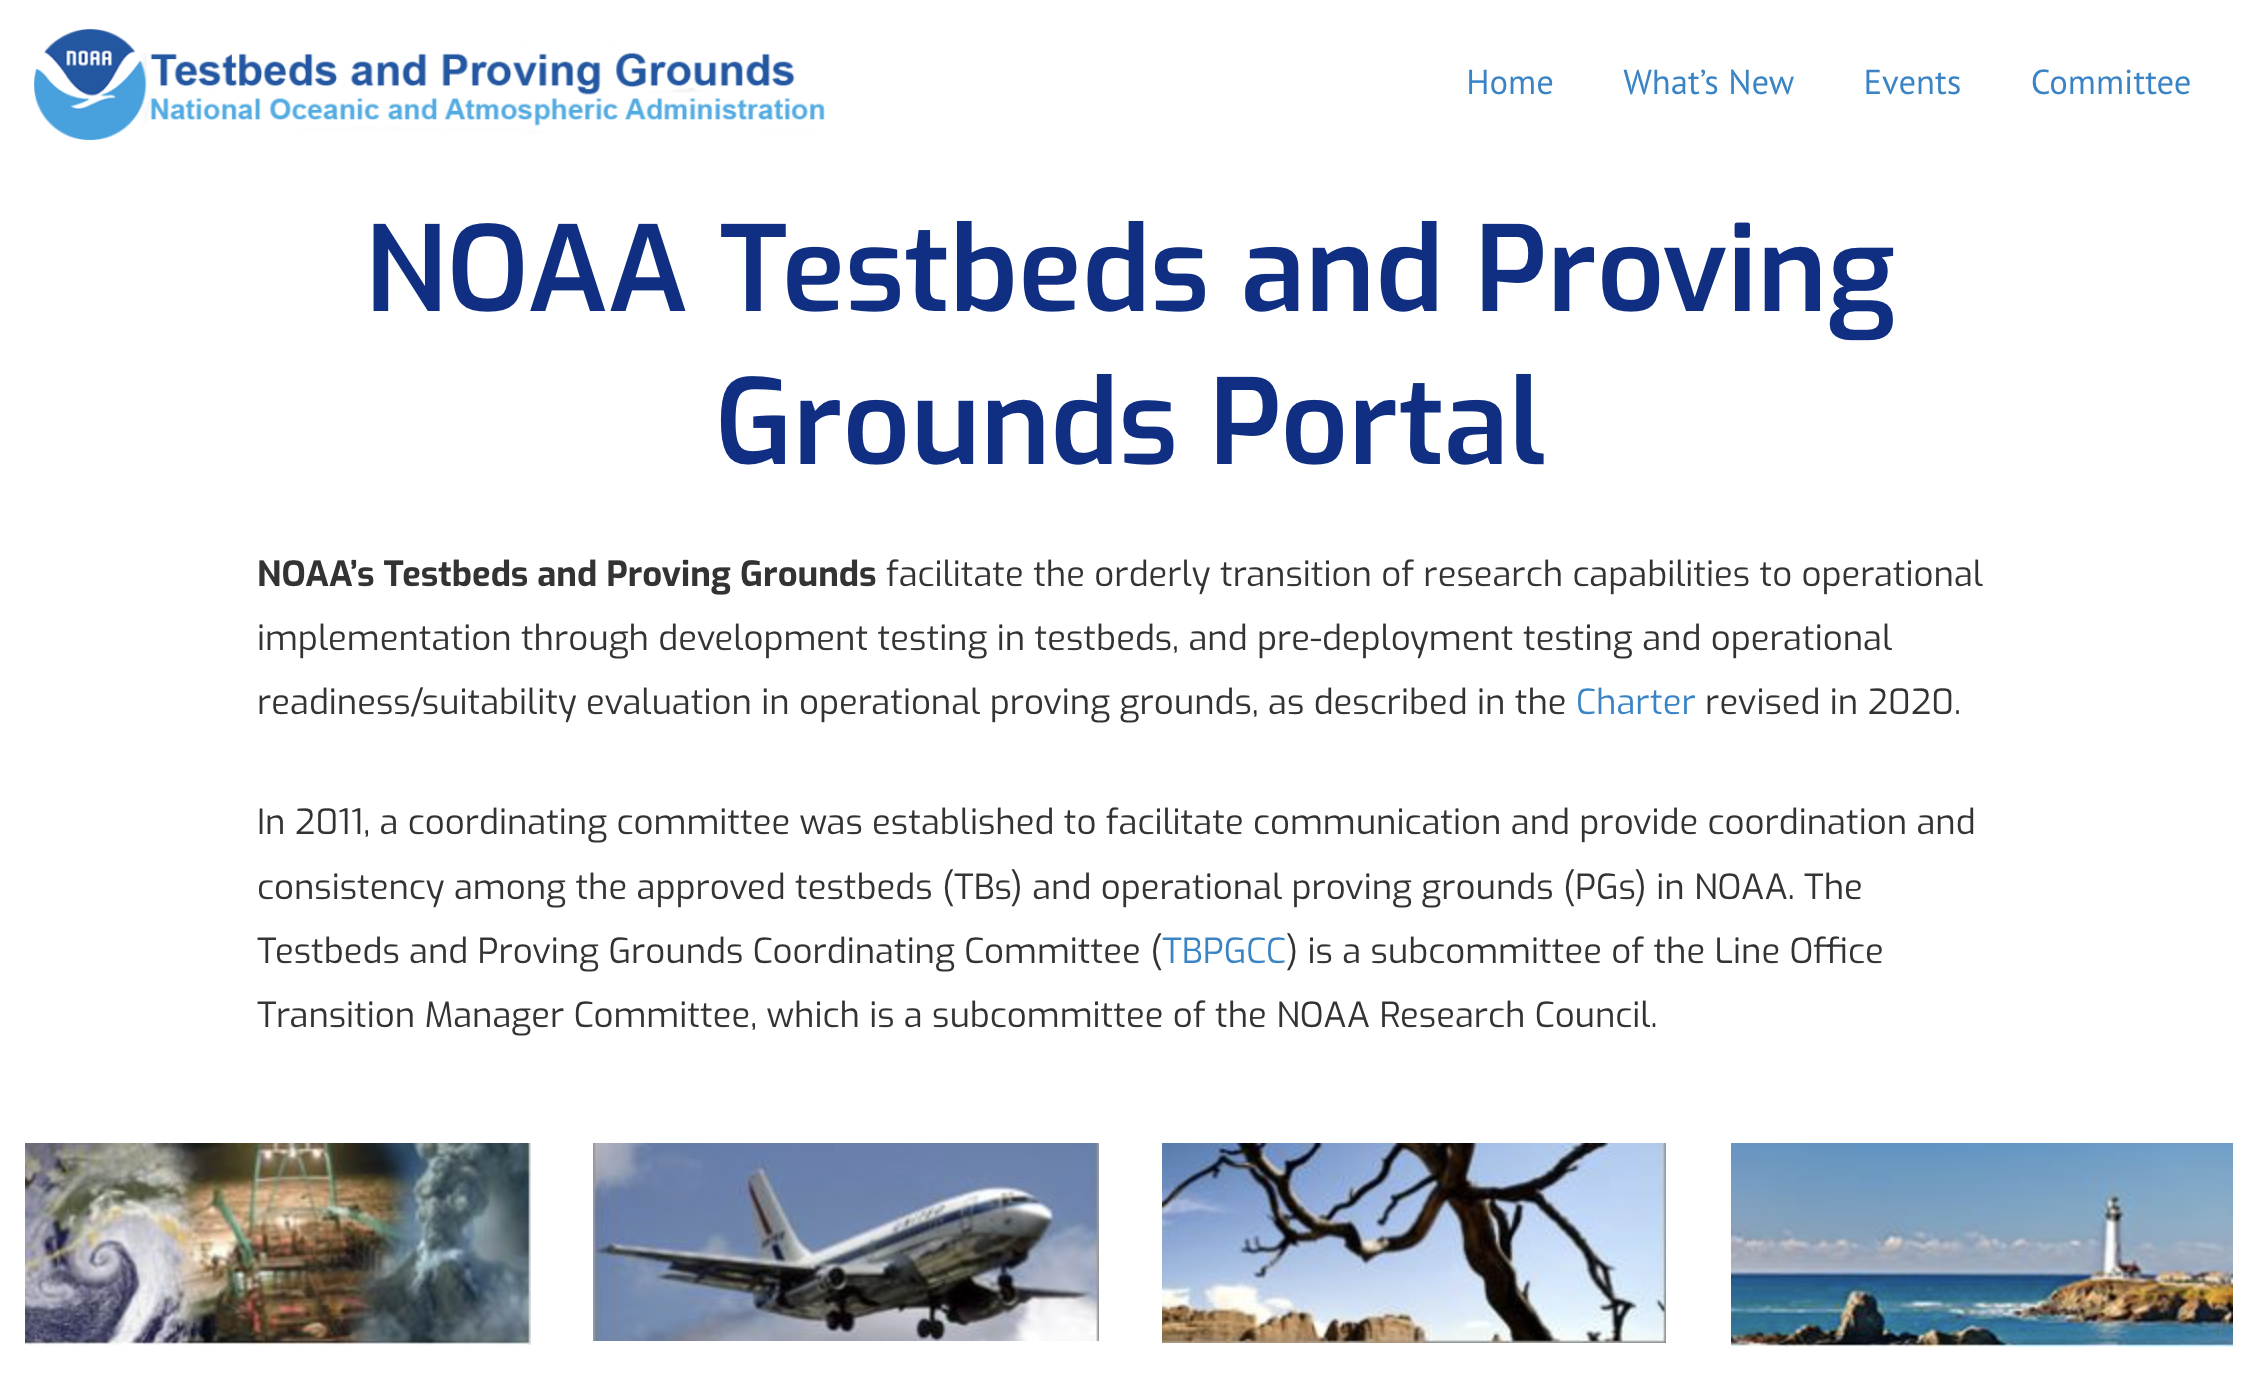 NOAA Testbeds and Proving Grounds Website Screenshot